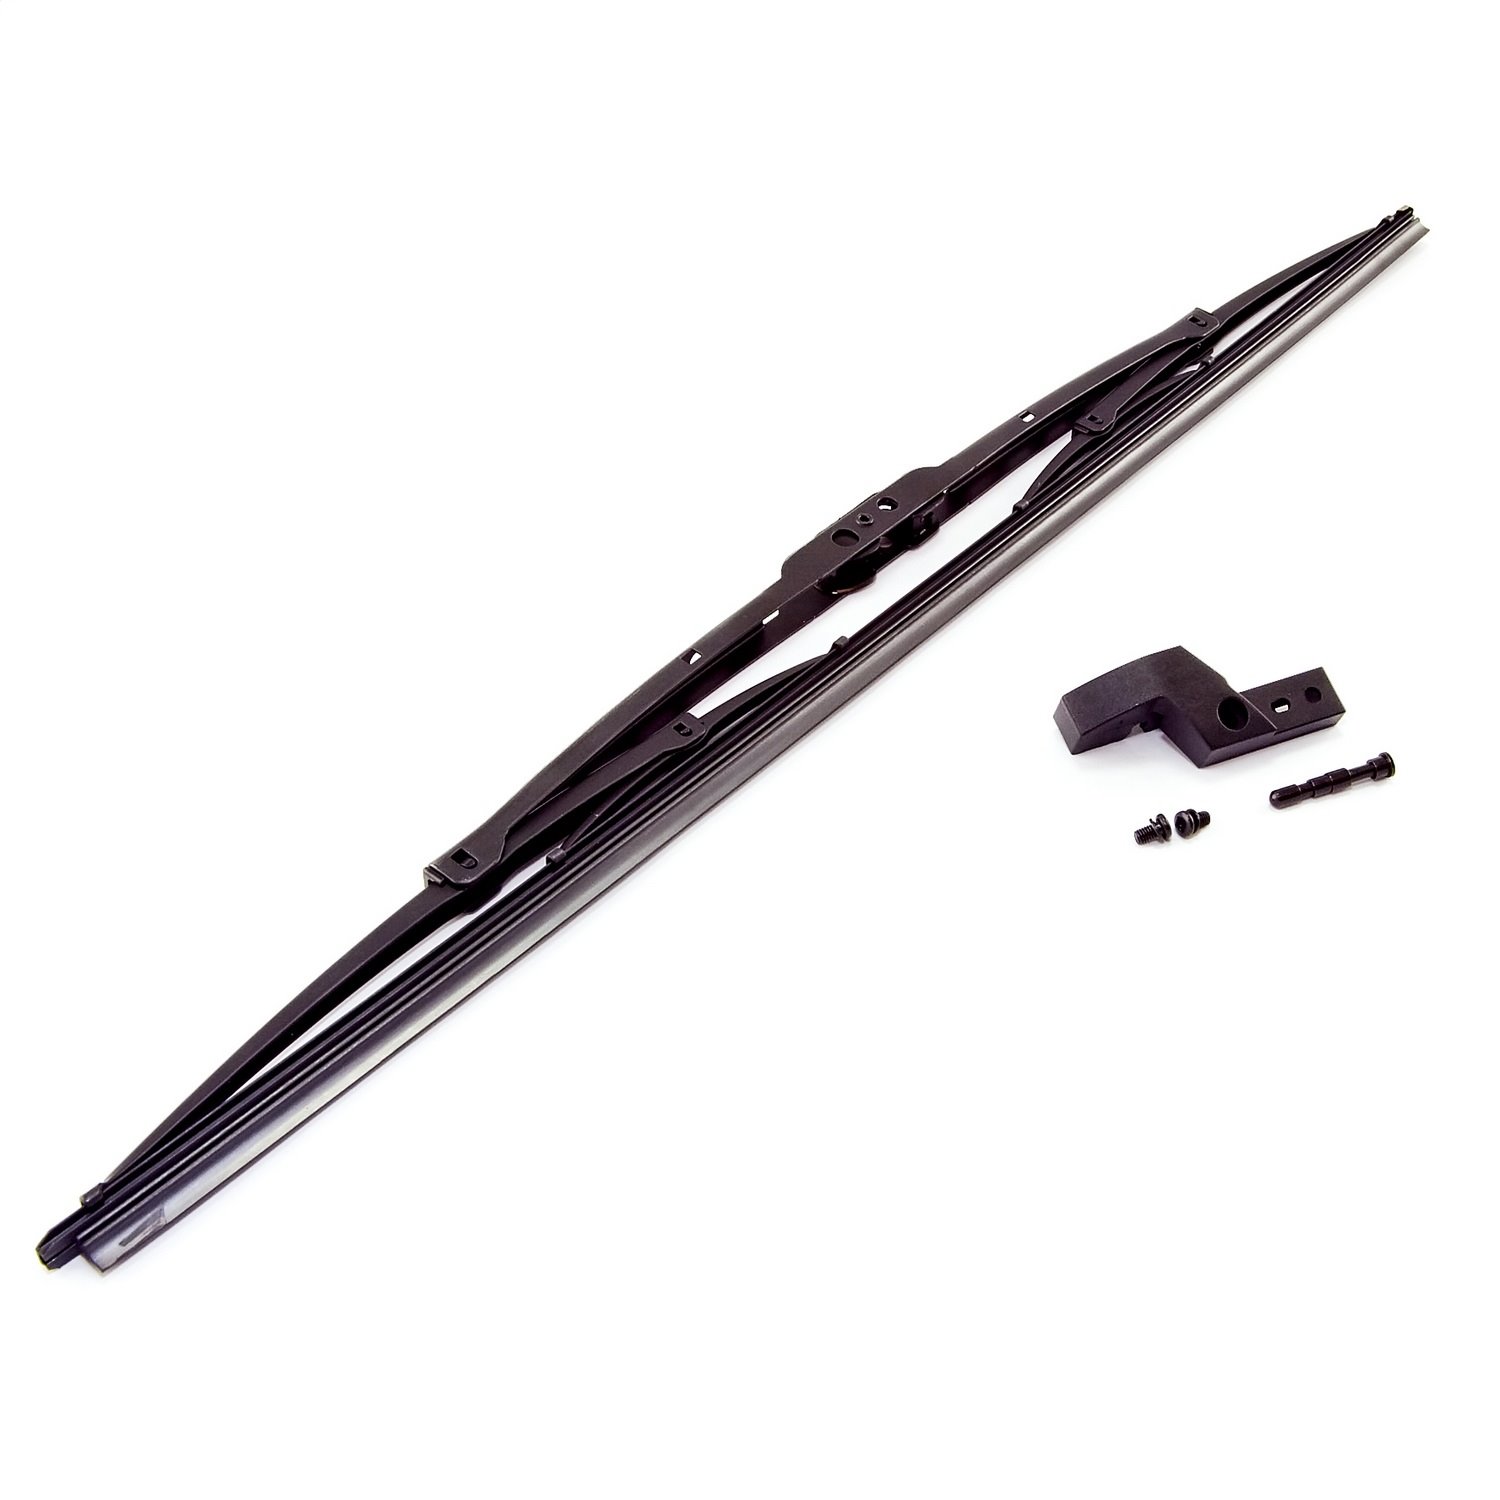 This 19 inch front windshield wiper blade from Omix-ADA fits 93-98 Jeep Grand Cherokee ZJ and 02-07 KJ Libertys.